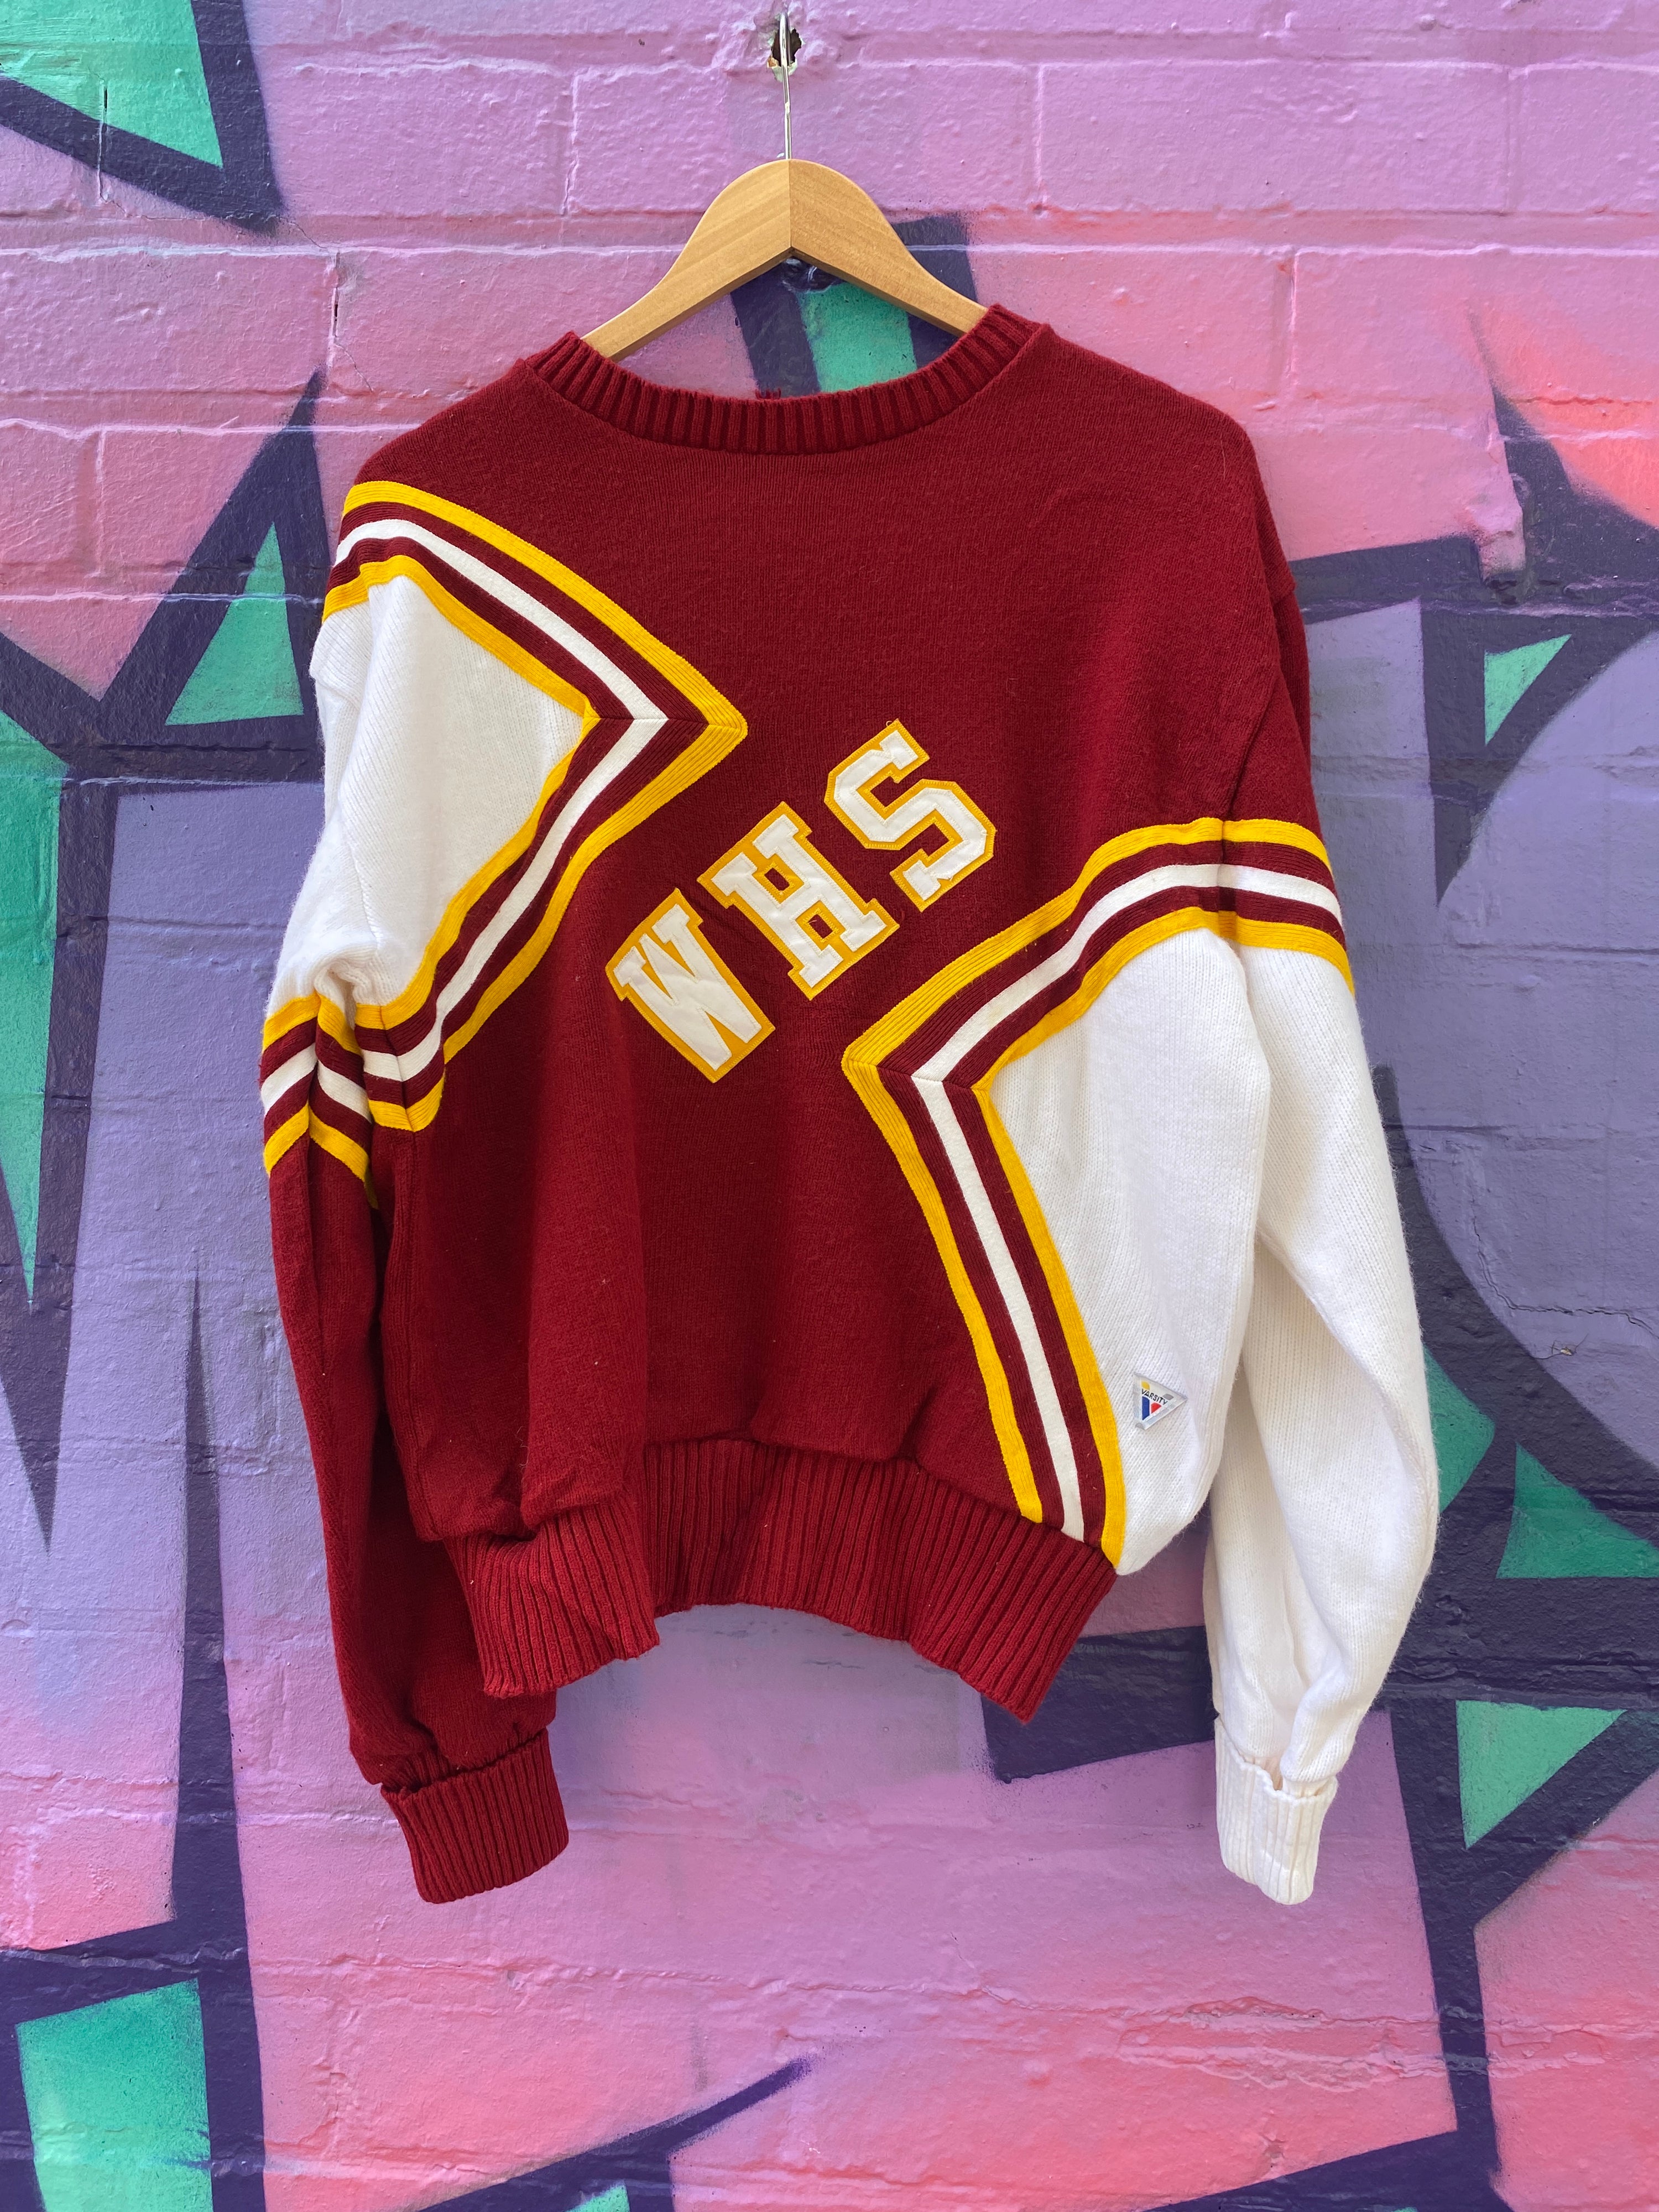 S - WHS Varsity Vintage Knit Sweater Red/Yellow/White